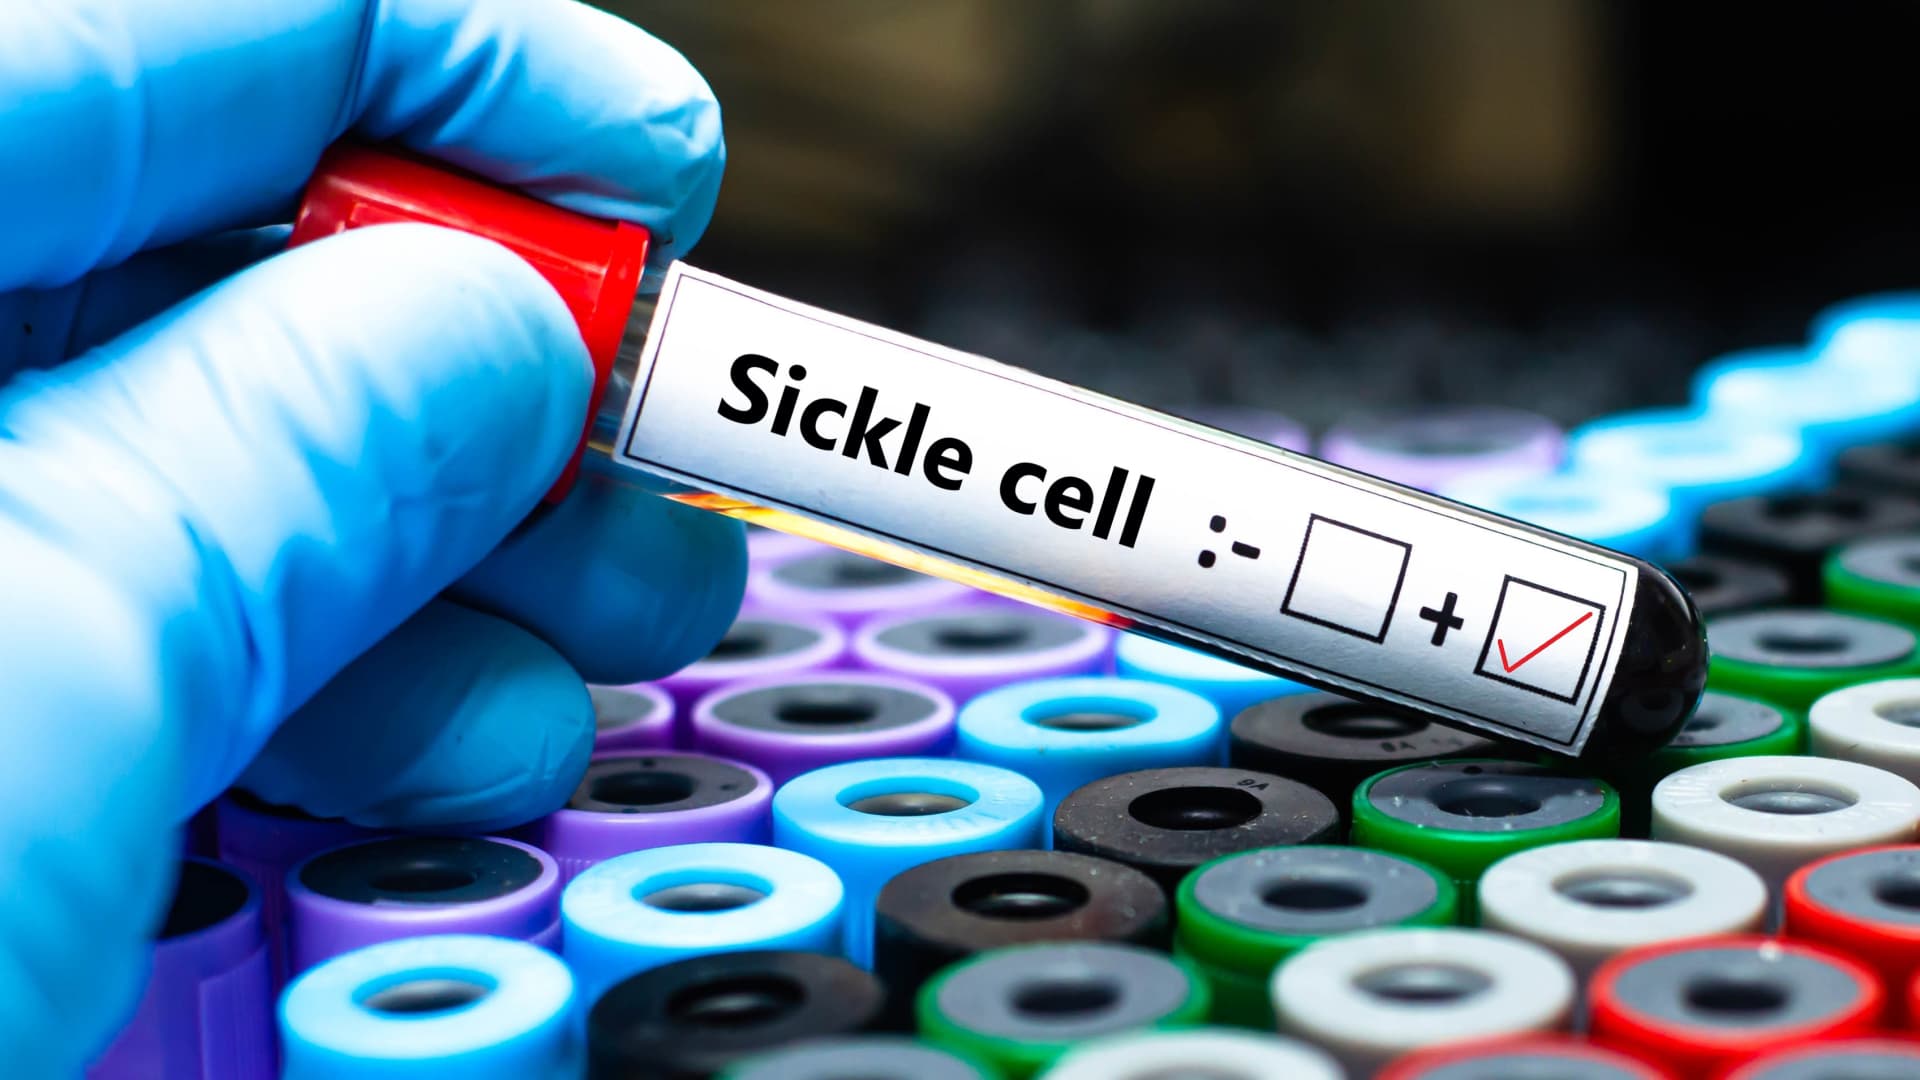 New sickle cell gene therapies are a breakthrough, but solving how to pay their high prices is a struggle